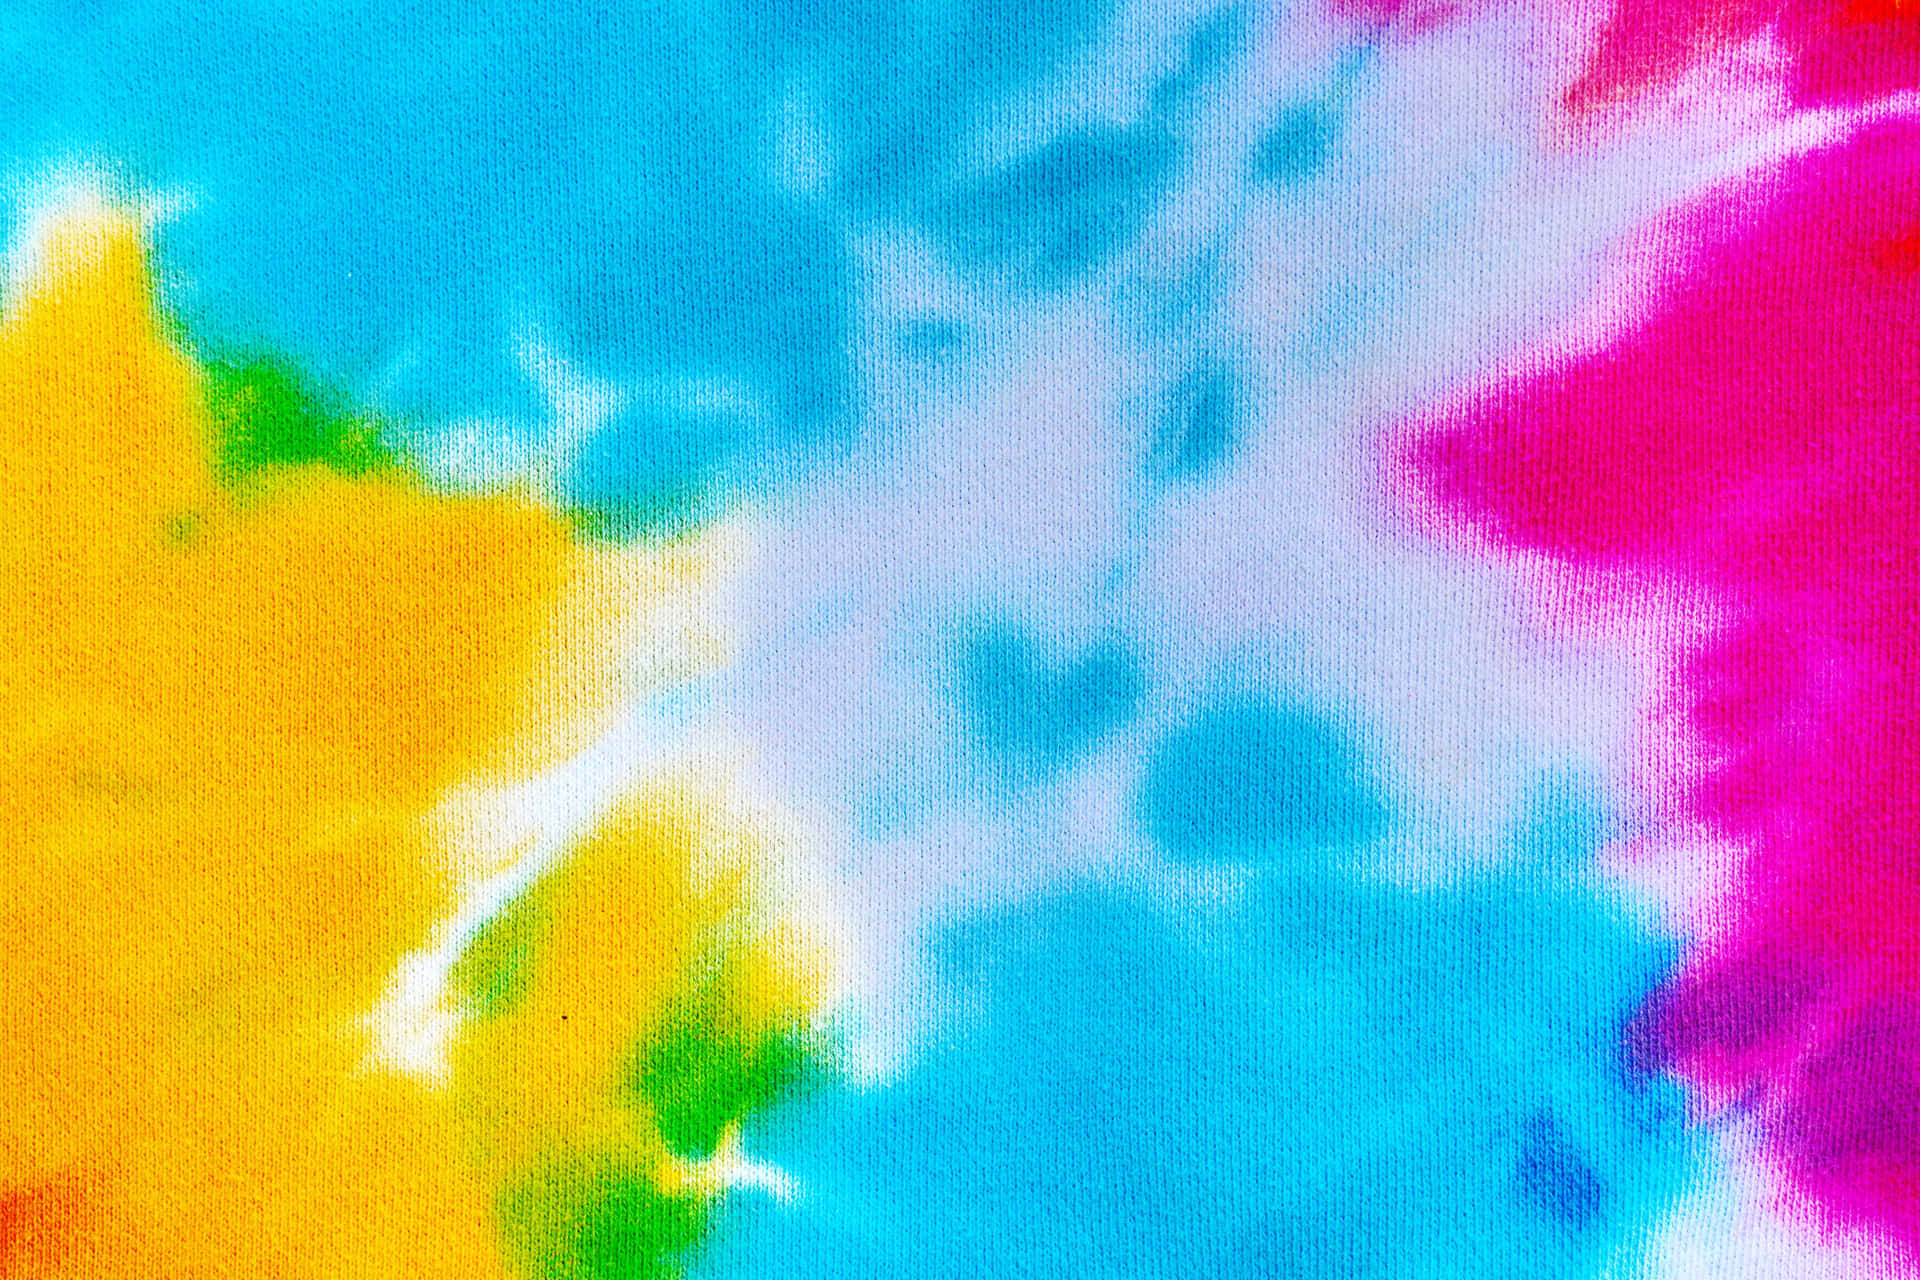 A mesmerizing swirl of vibrant colors in a unique tie-dye pattern.